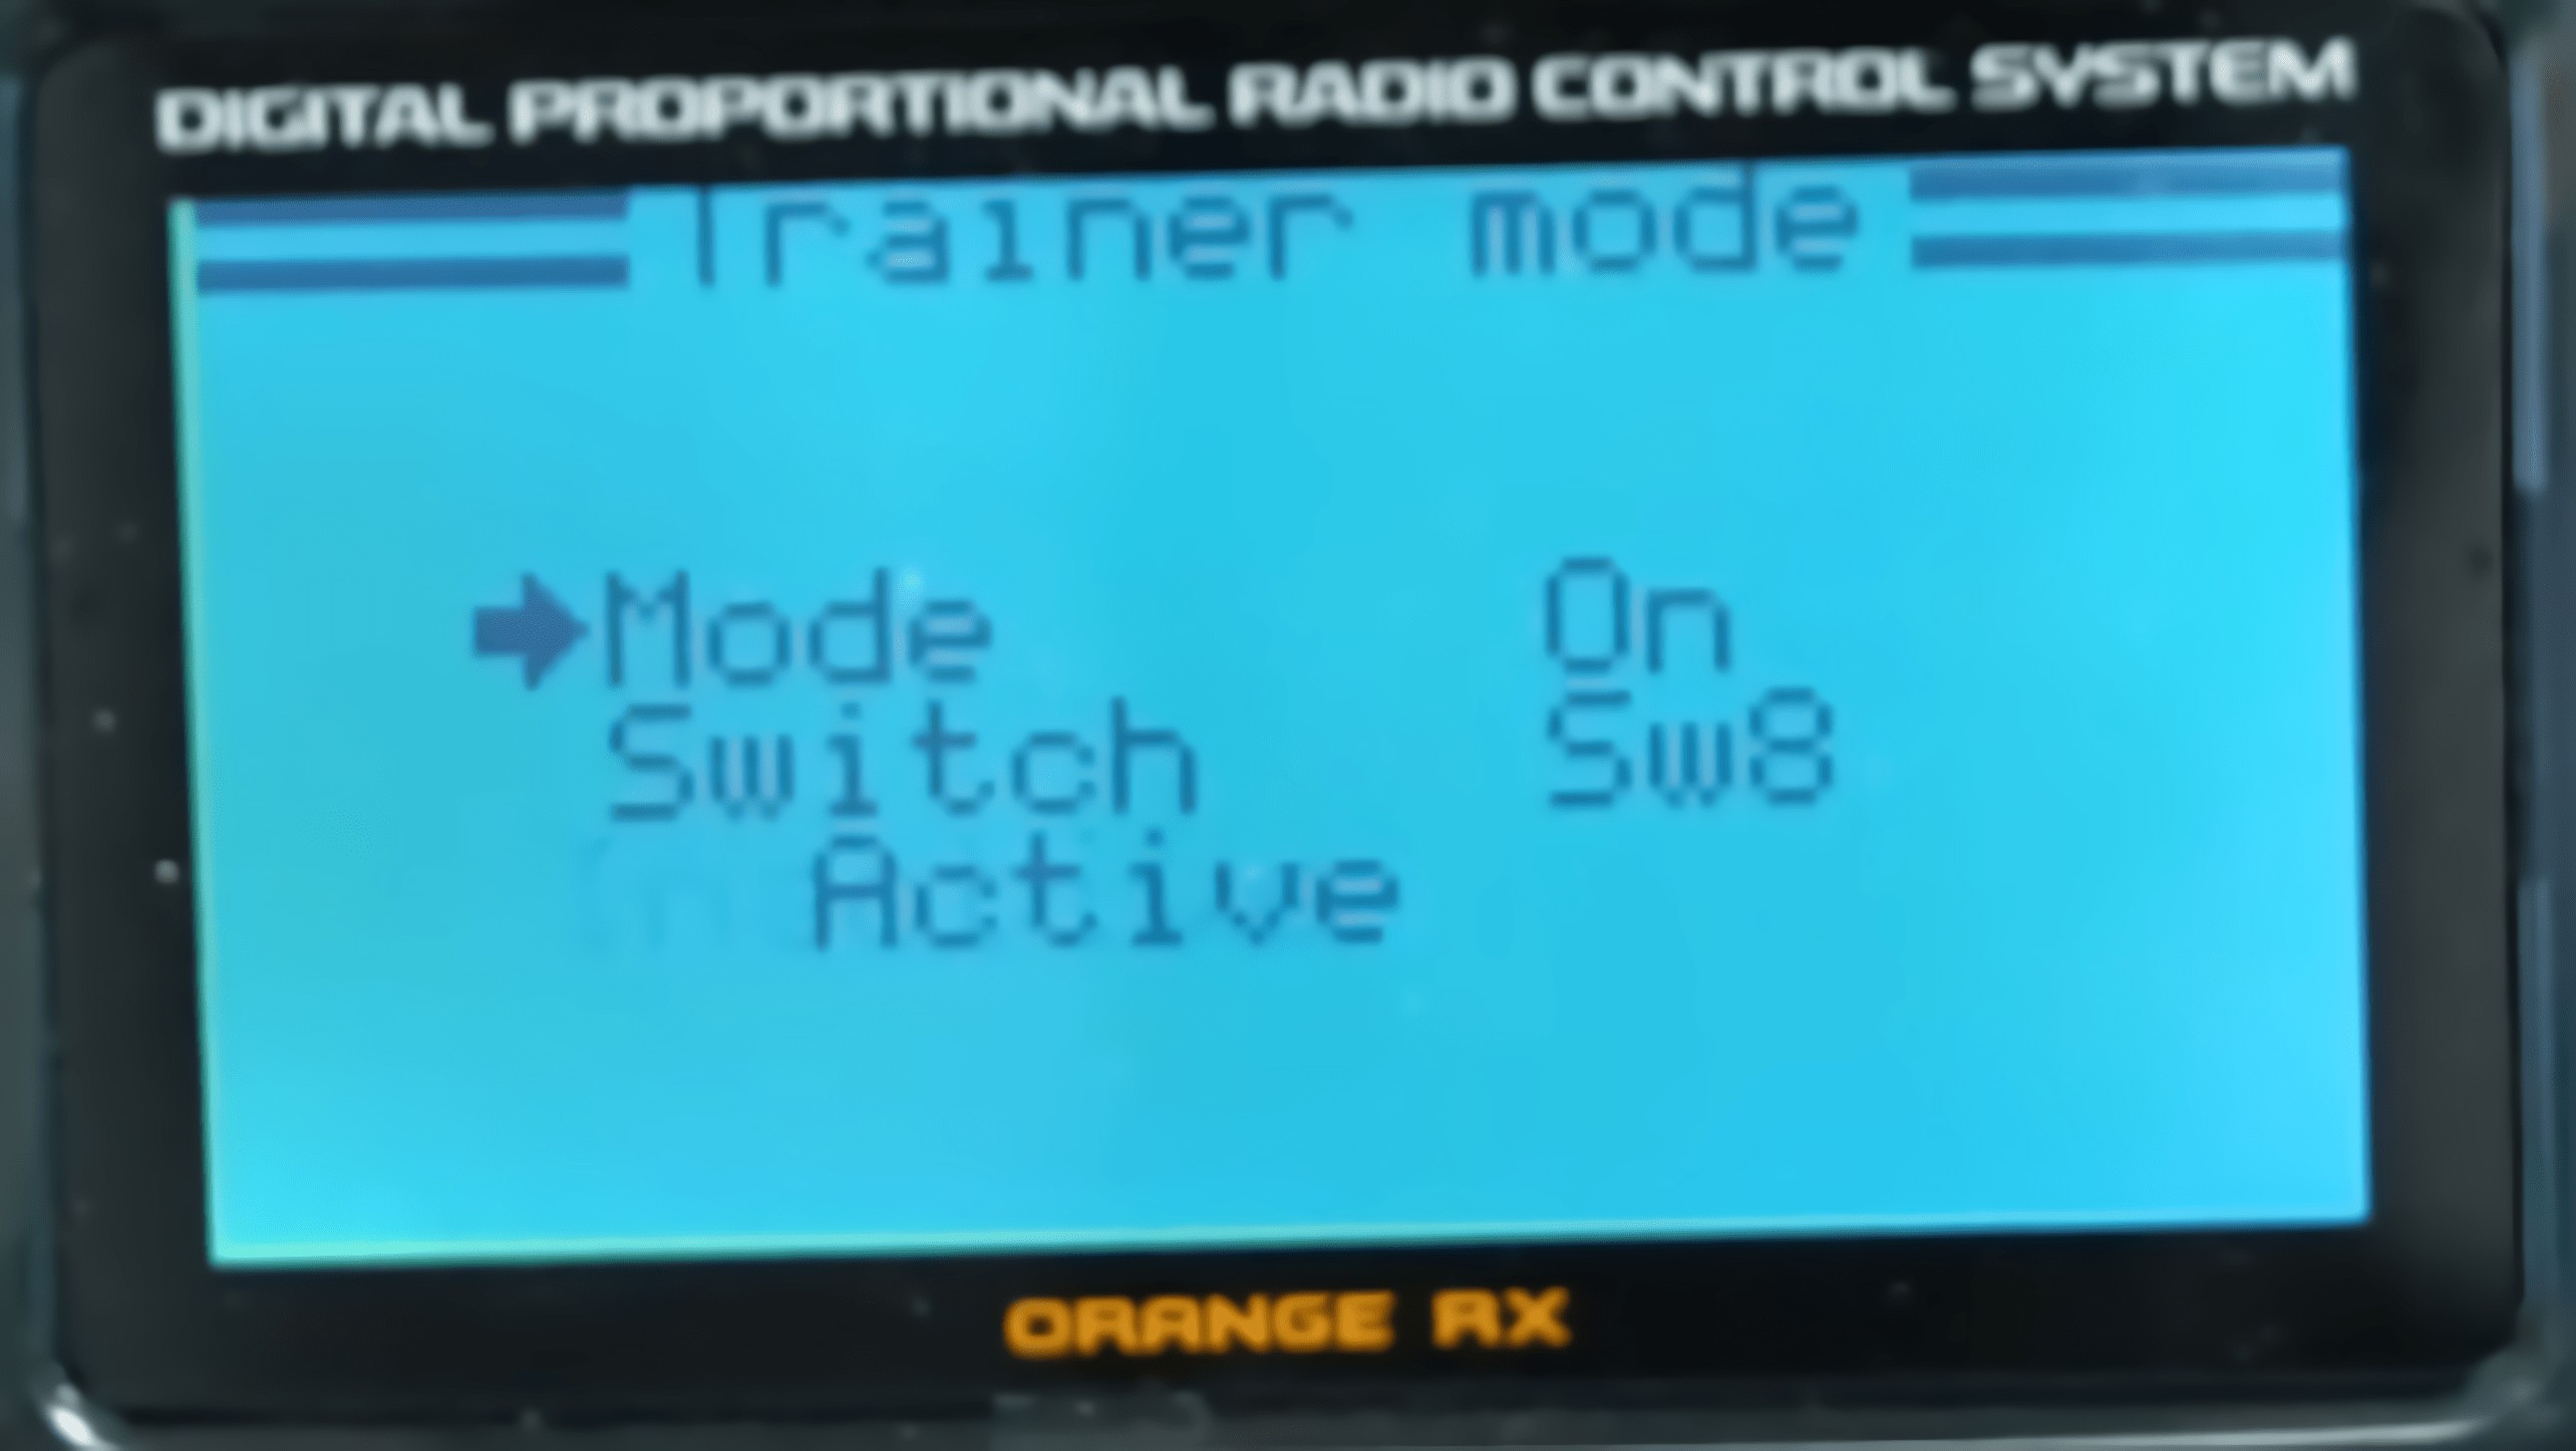 Confirm that the switch is active by pulling & releasing the switch and checking that the radio states Active or Inactive correctly